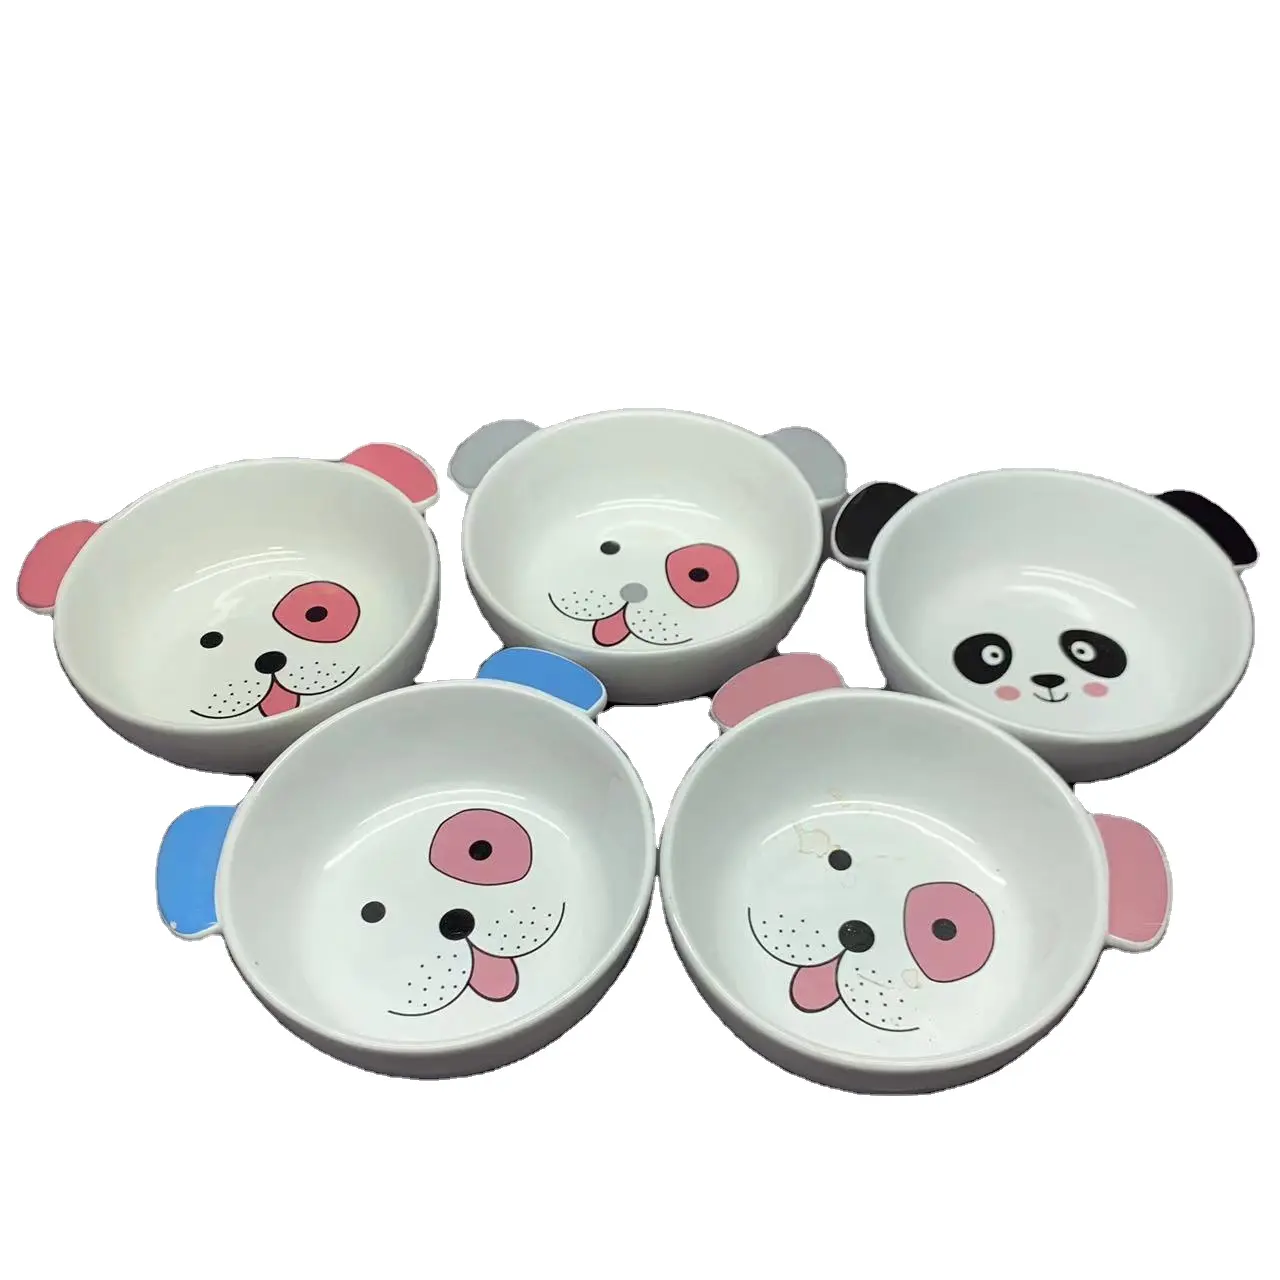 Dog and Panda Head Shape Ceramic Dog Bowl, Pet Dish for Dogs and Cats, Heavy Pet Bowl (8 Inches) Gift & Crafts